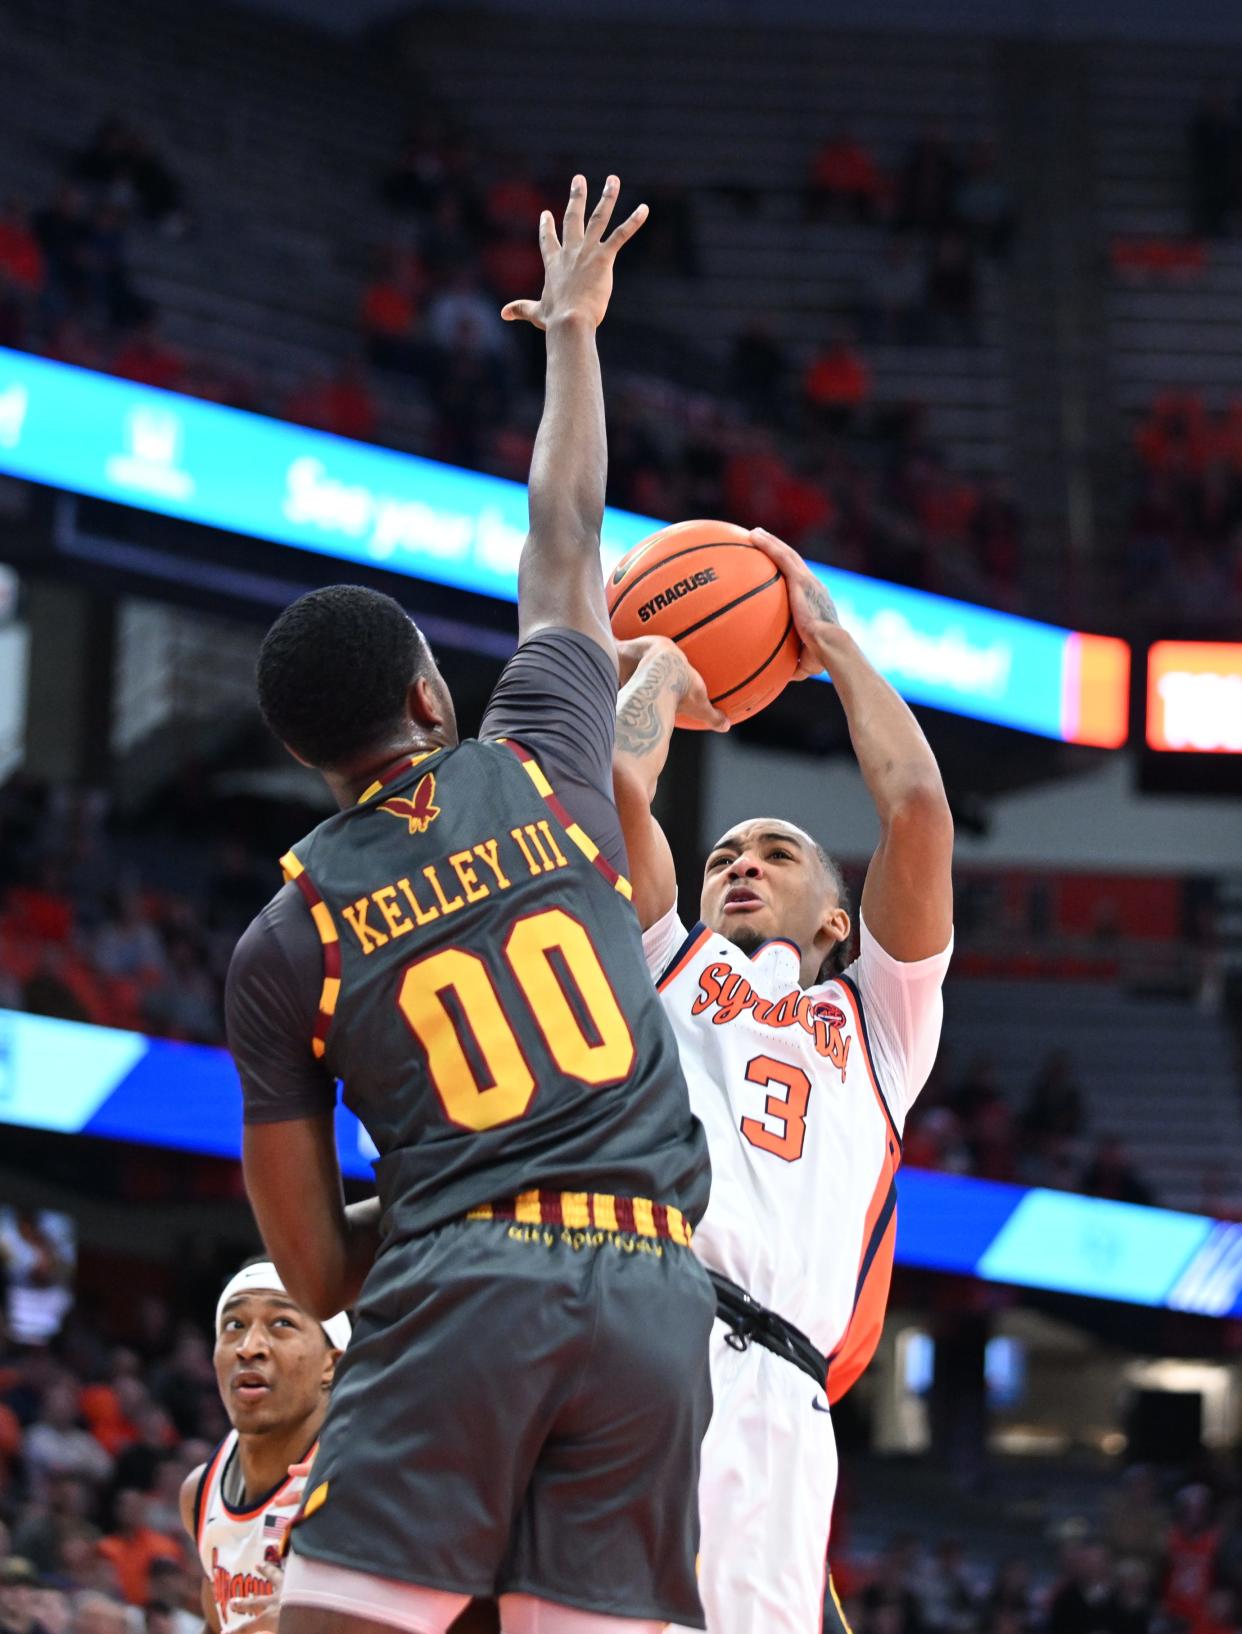 Syracuse Orange guard Judah Mintz (3) shoots the ball as Boston College Eagles guard Chas Kelley III (00) defends in the second half at the JMA Wireless Dome.